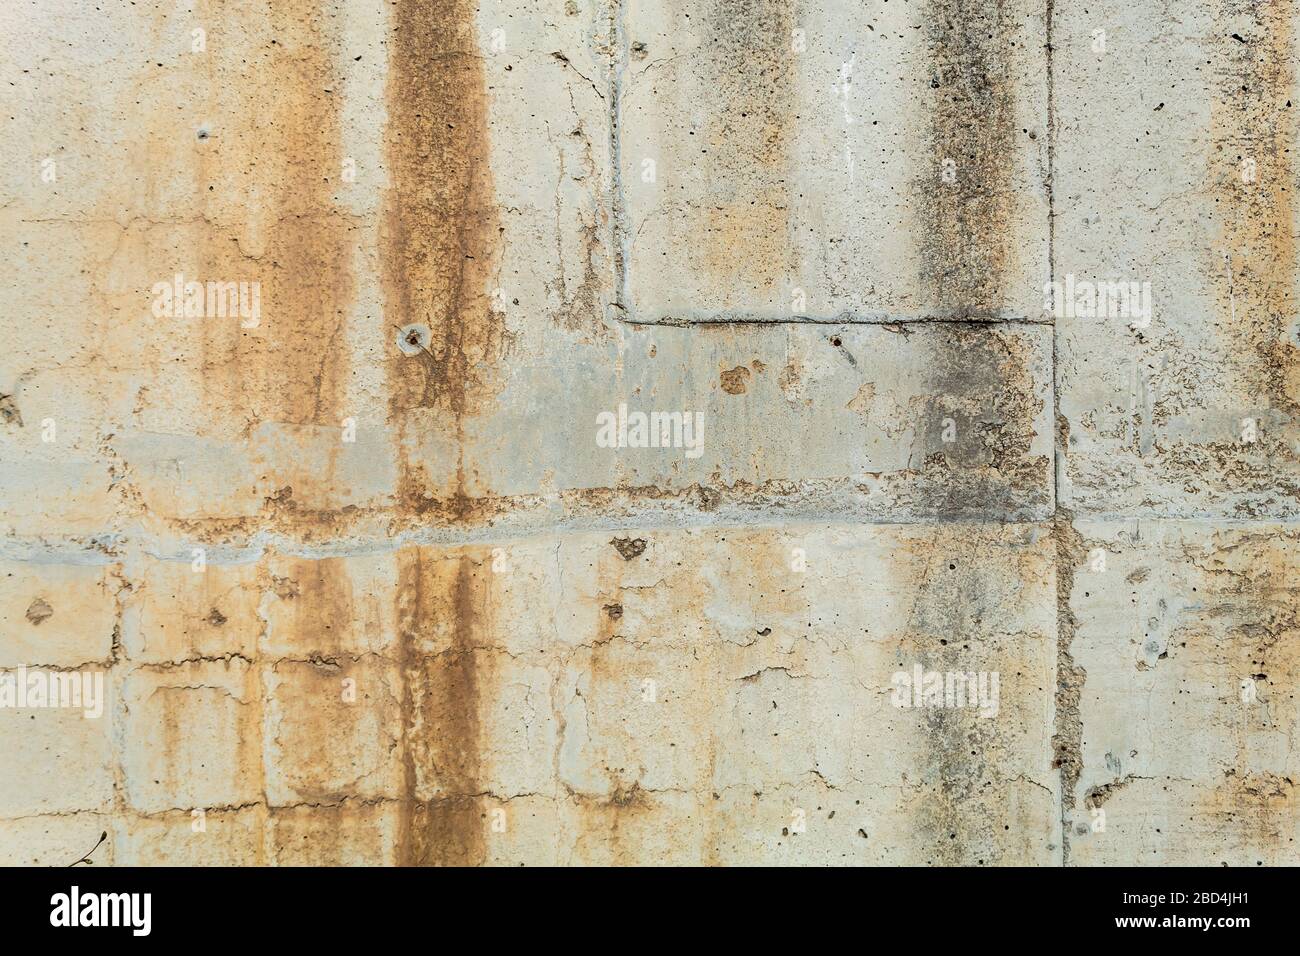 Old Damaged Concrete Wall Texture Stock Photo